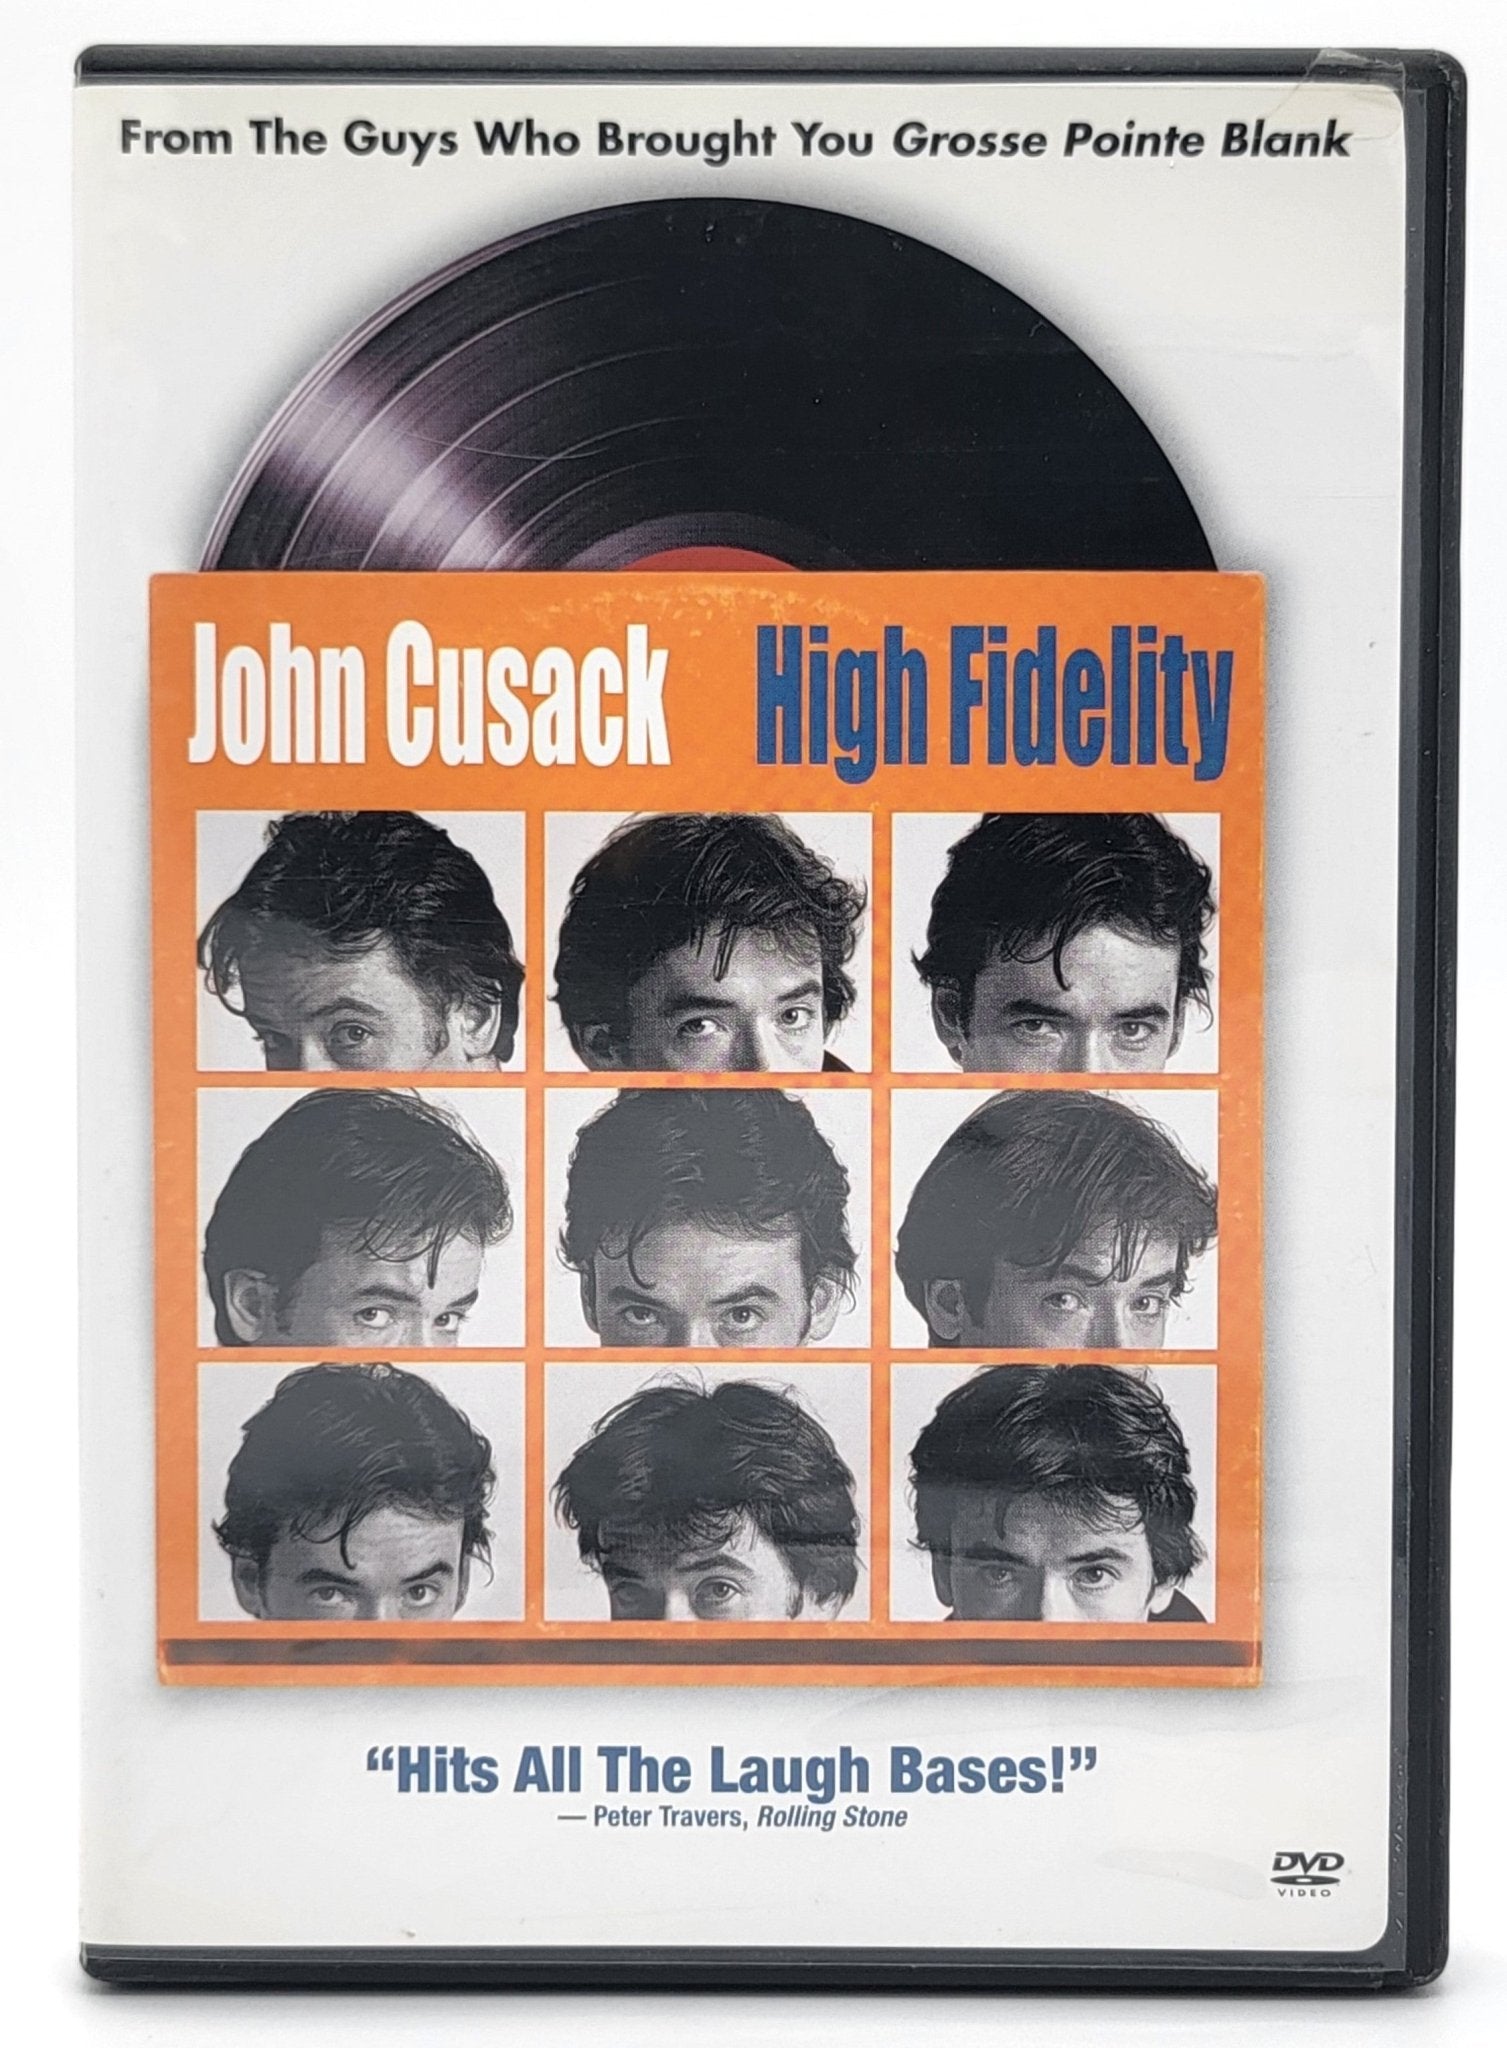 TOUCHSTONE PICTURES - High Fidelity | DVD | WideScreen - DVD - Steady Bunny Shop